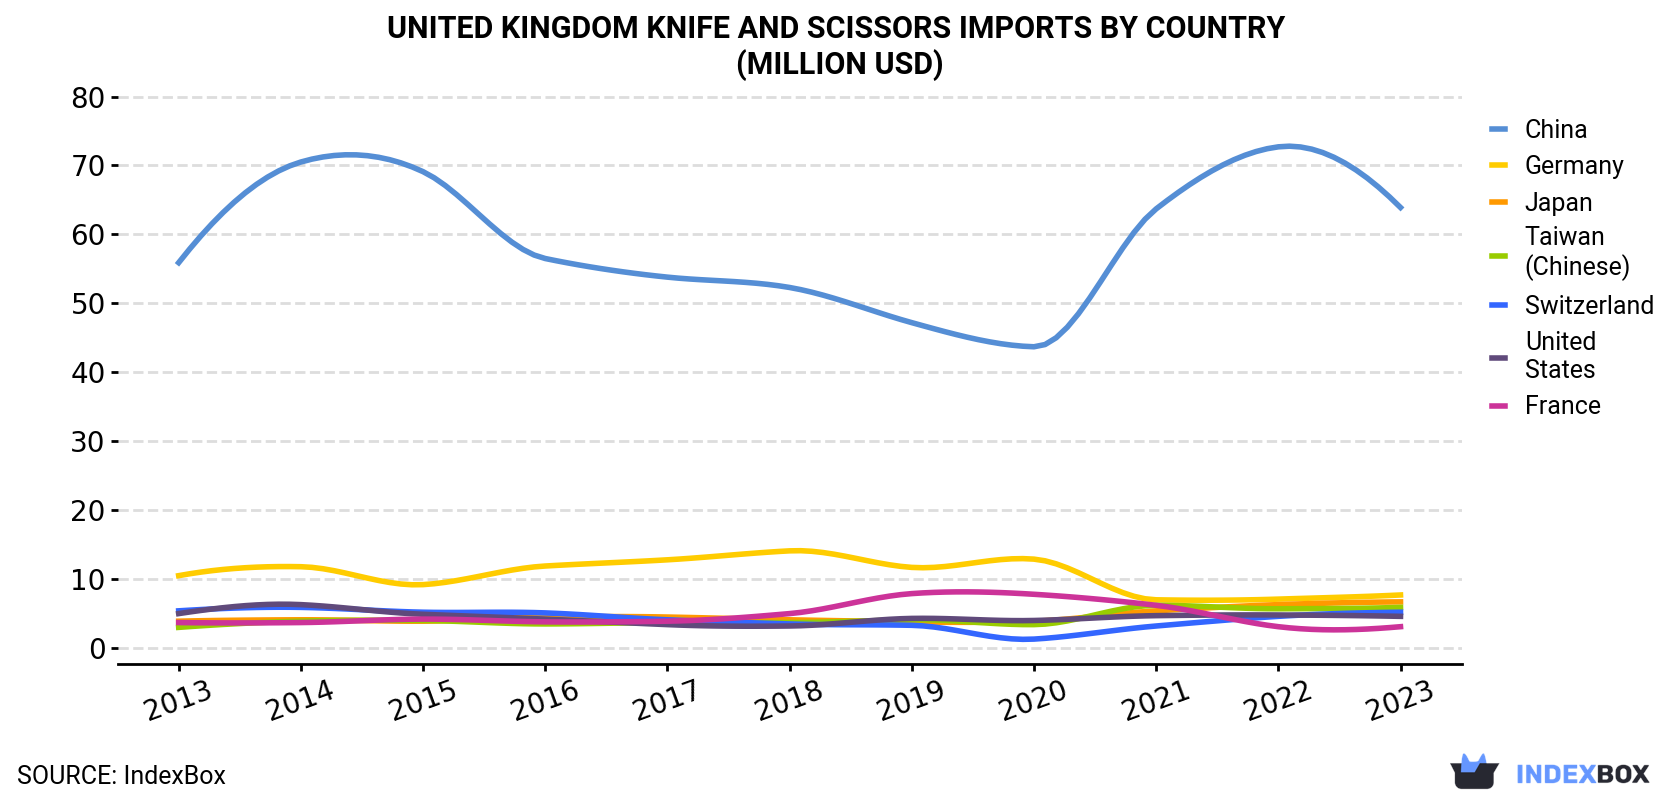 United Kingdom Knife And Scissors Imports By Country (Million USD)